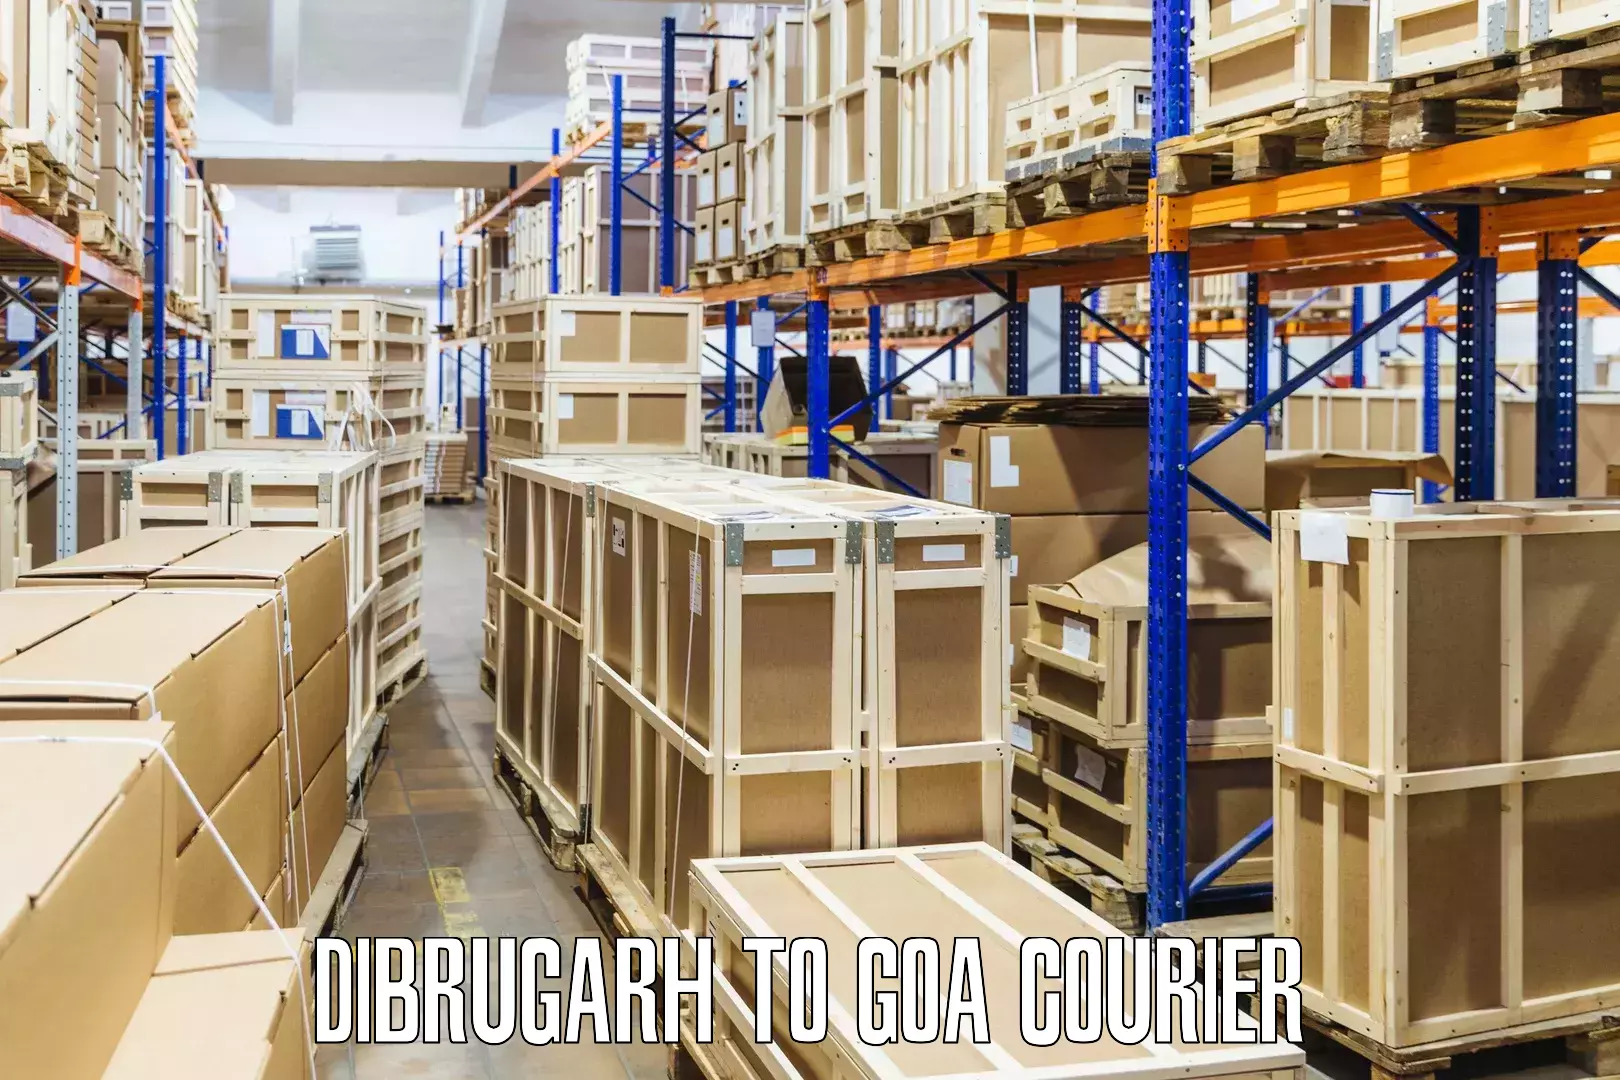 Full-service courier options Dibrugarh to Bardez